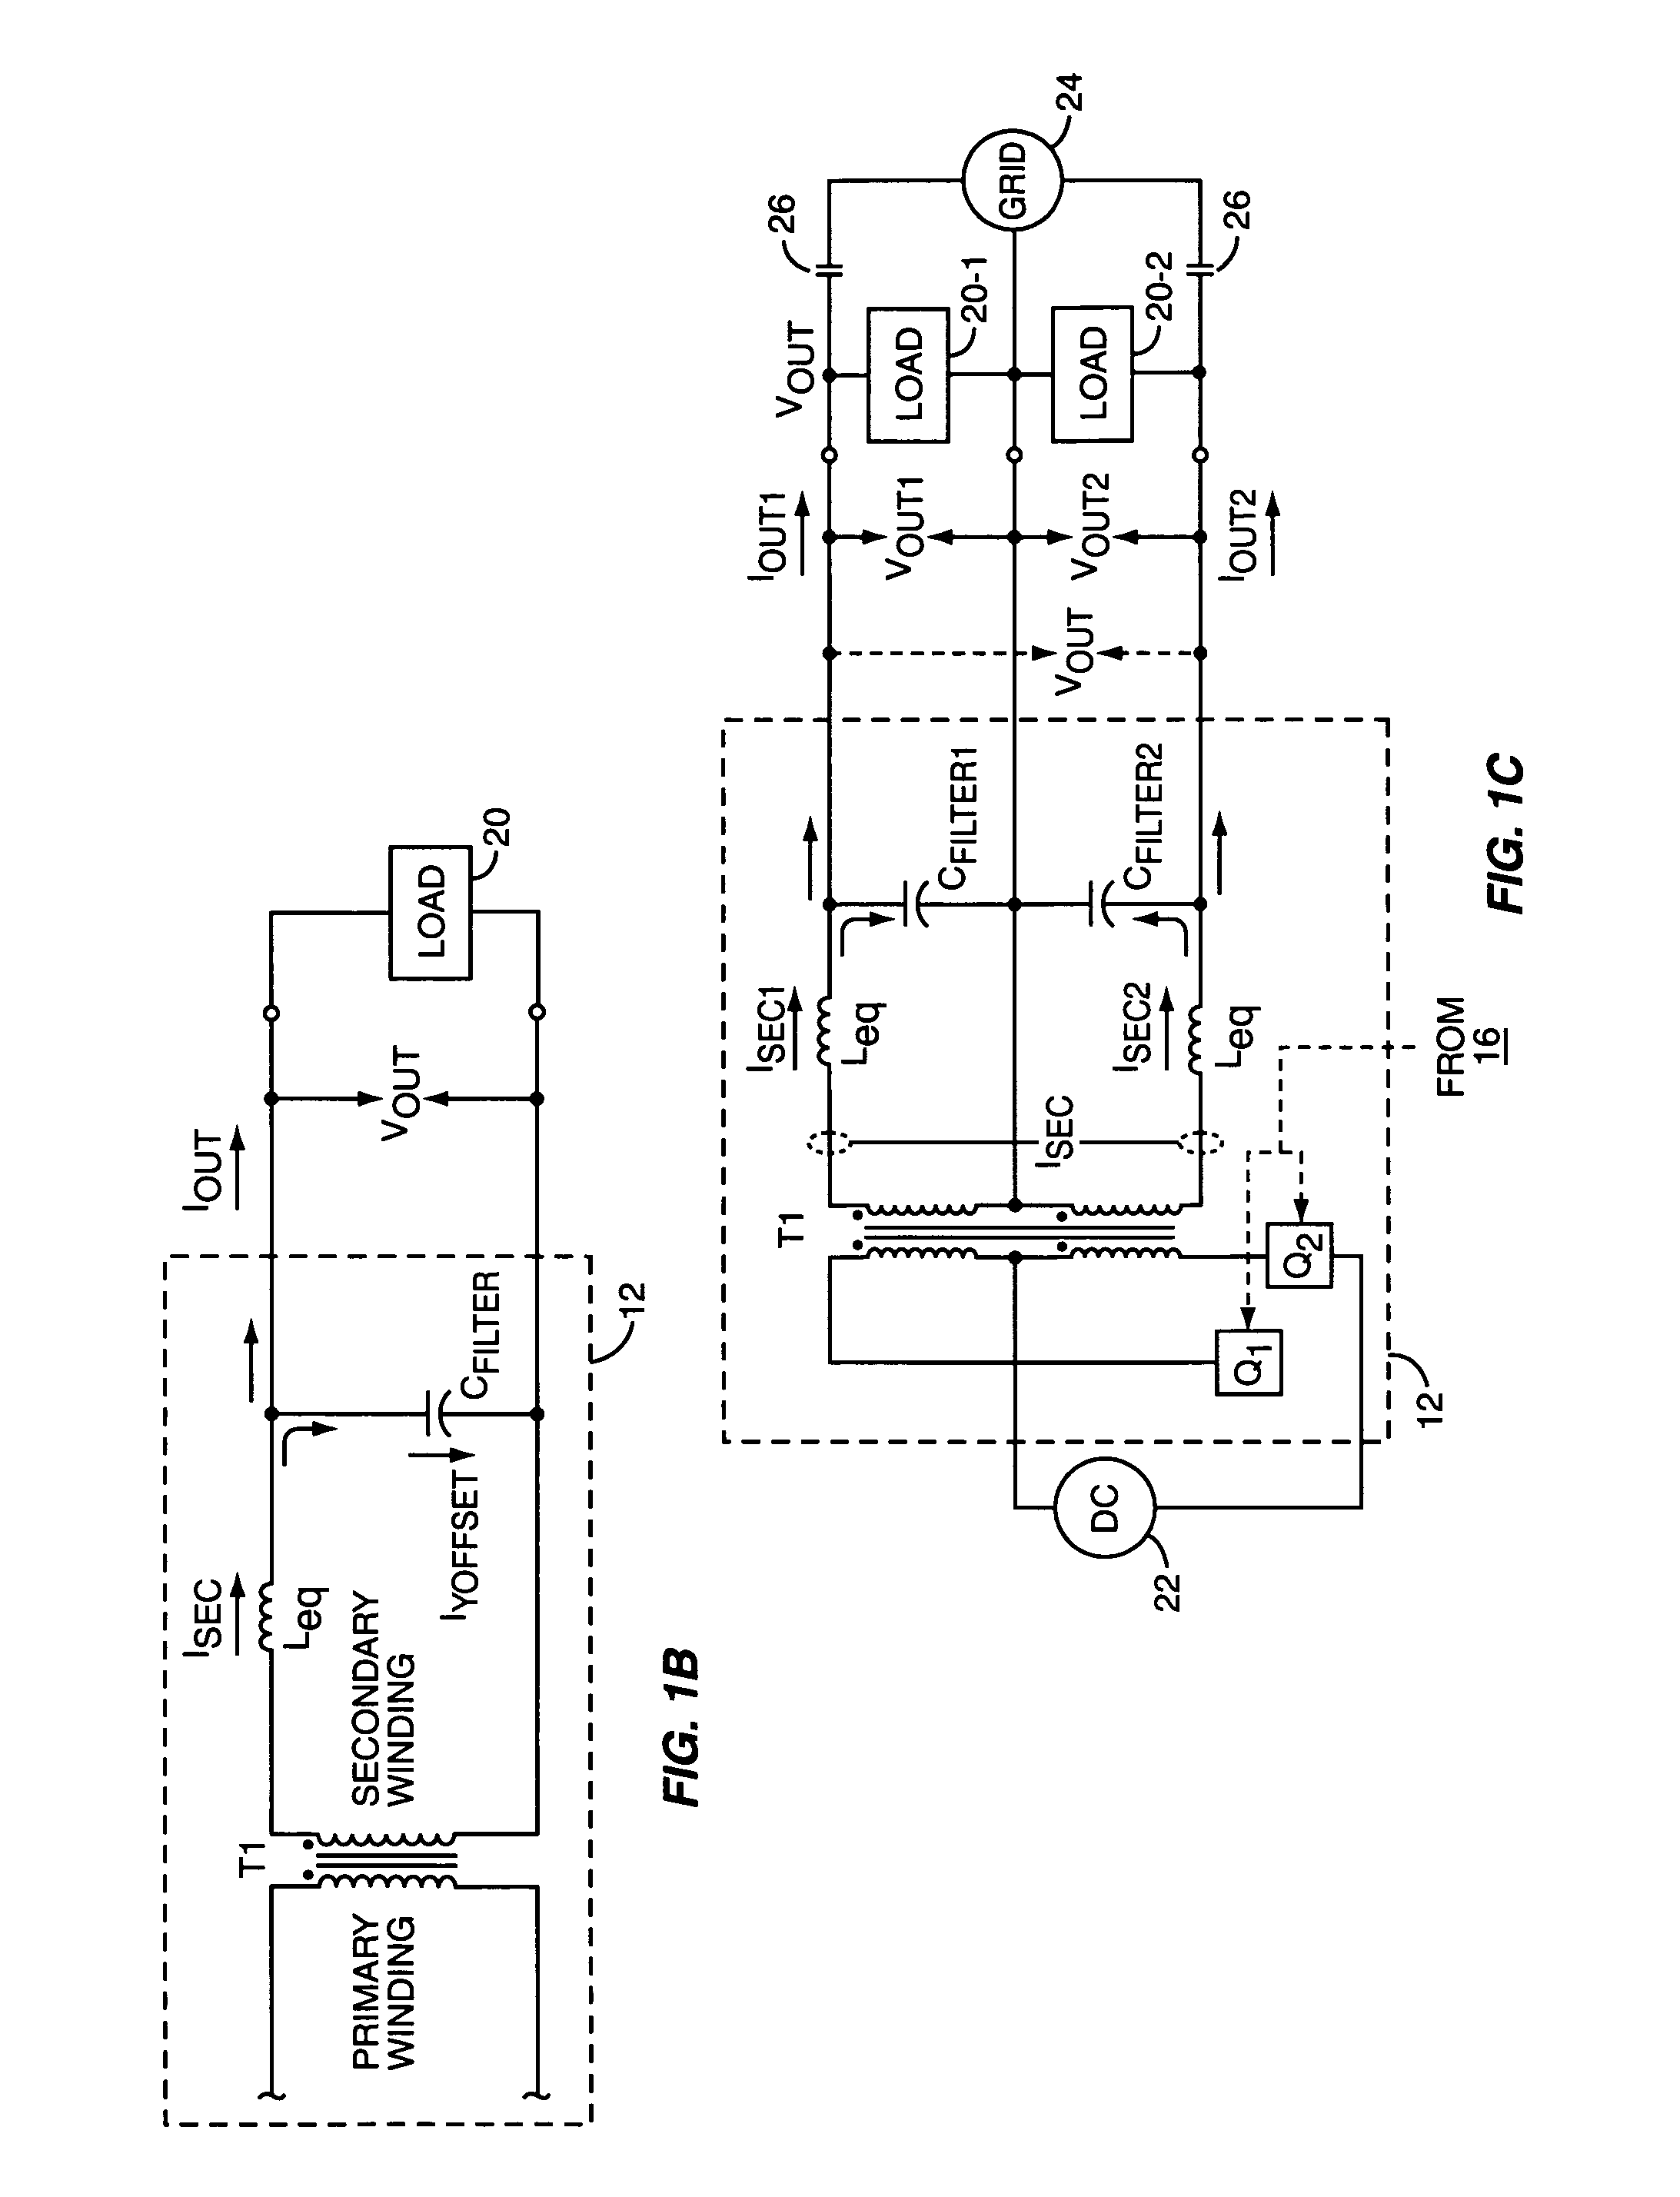 Method and apparatus for signal phase locking